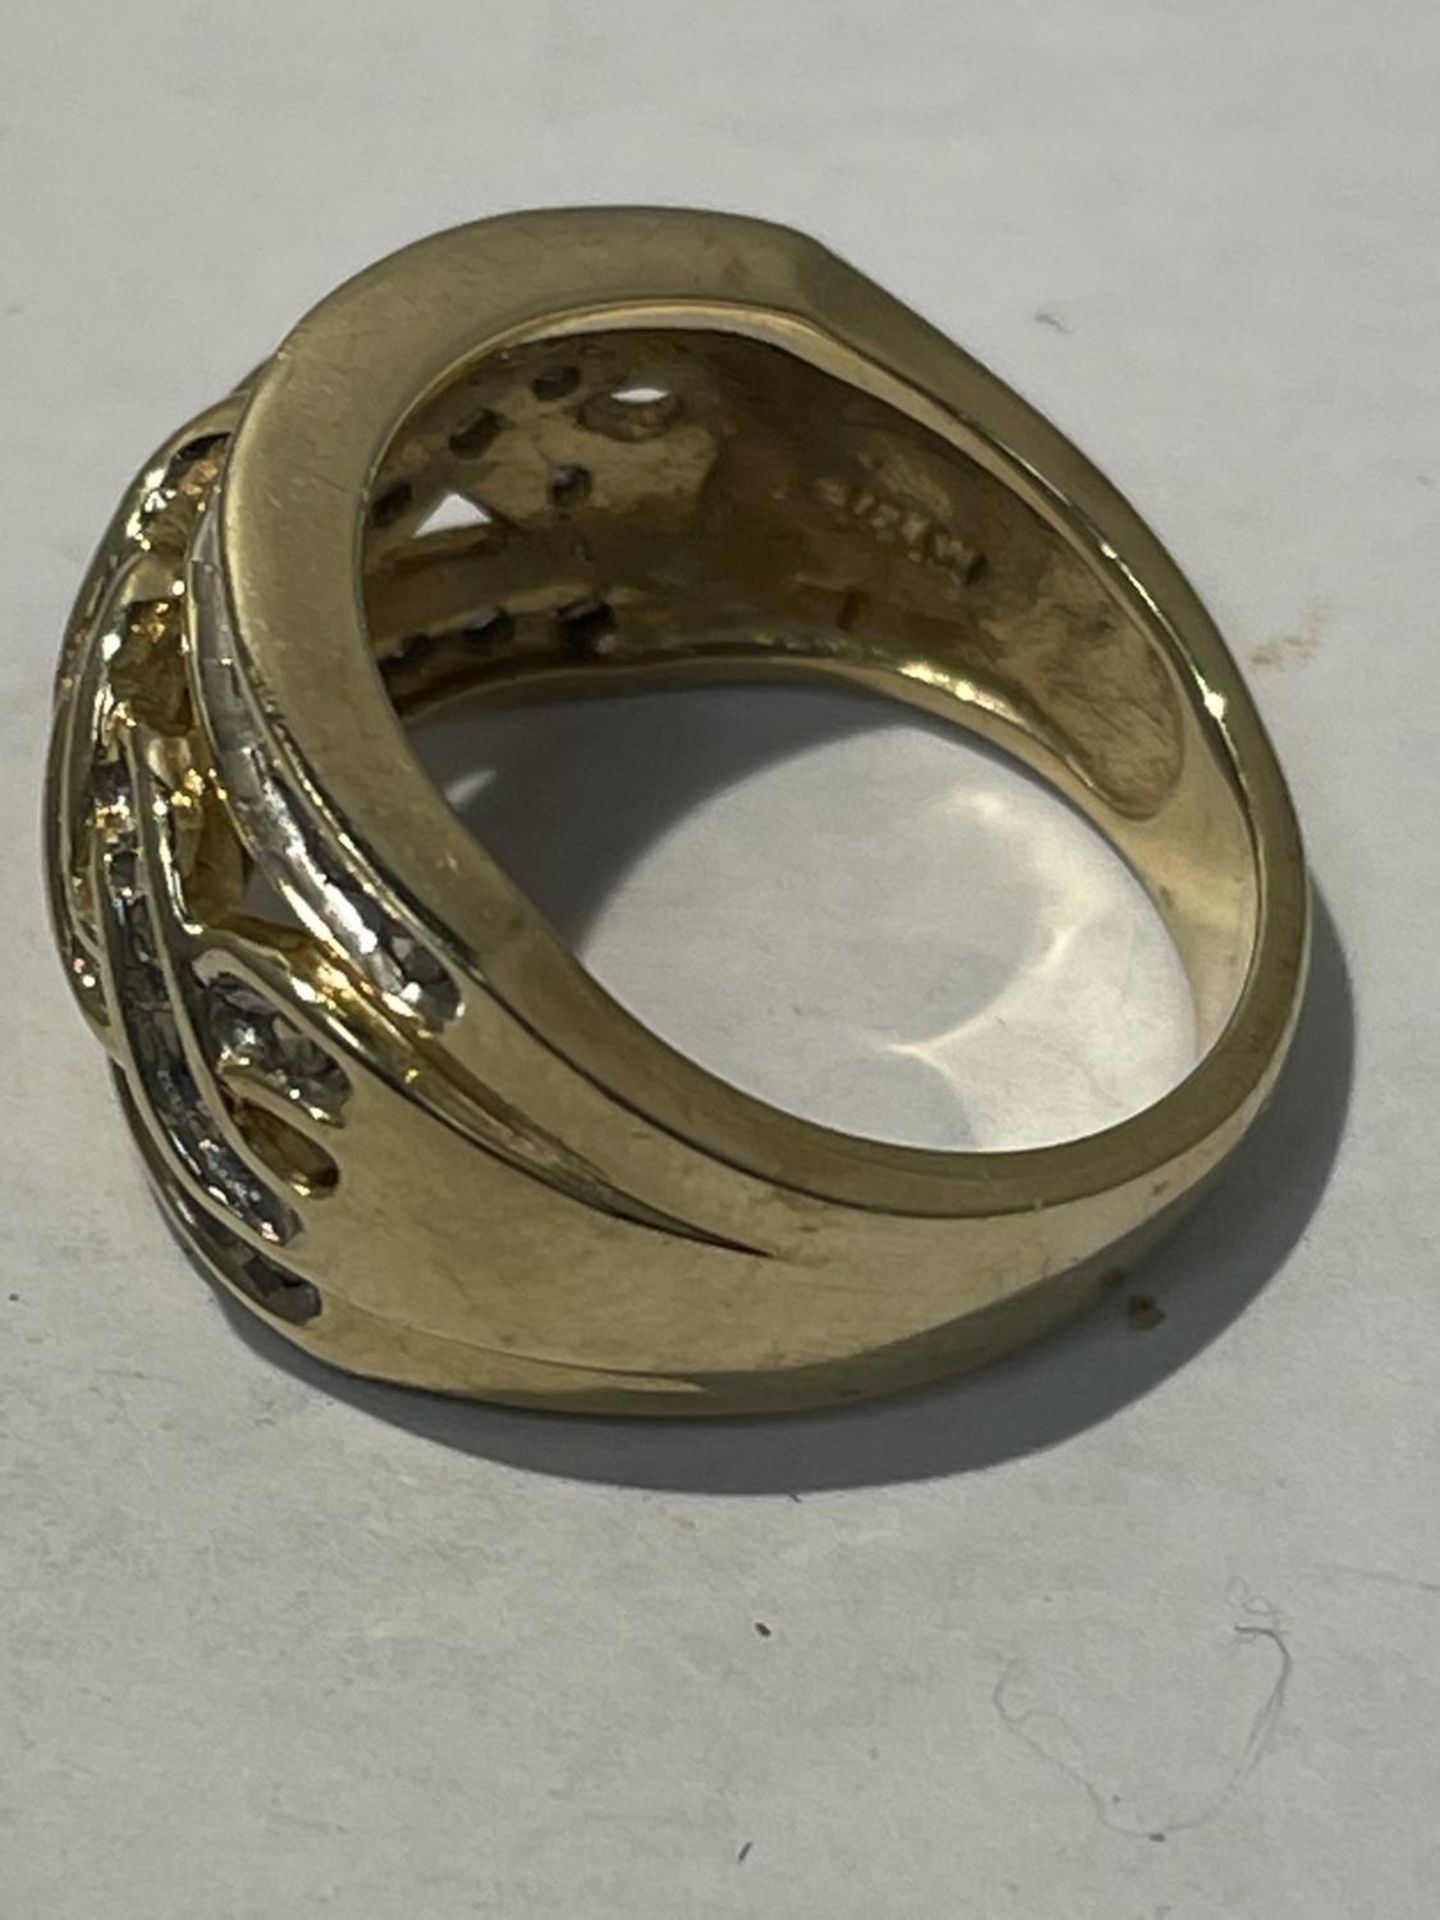 A 9 CARAT YELLOW GOLD RING WITH 1 CARAT OF DIAMONDS WITH A TWIST DESIGN SIZE N/O - Image 3 of 4